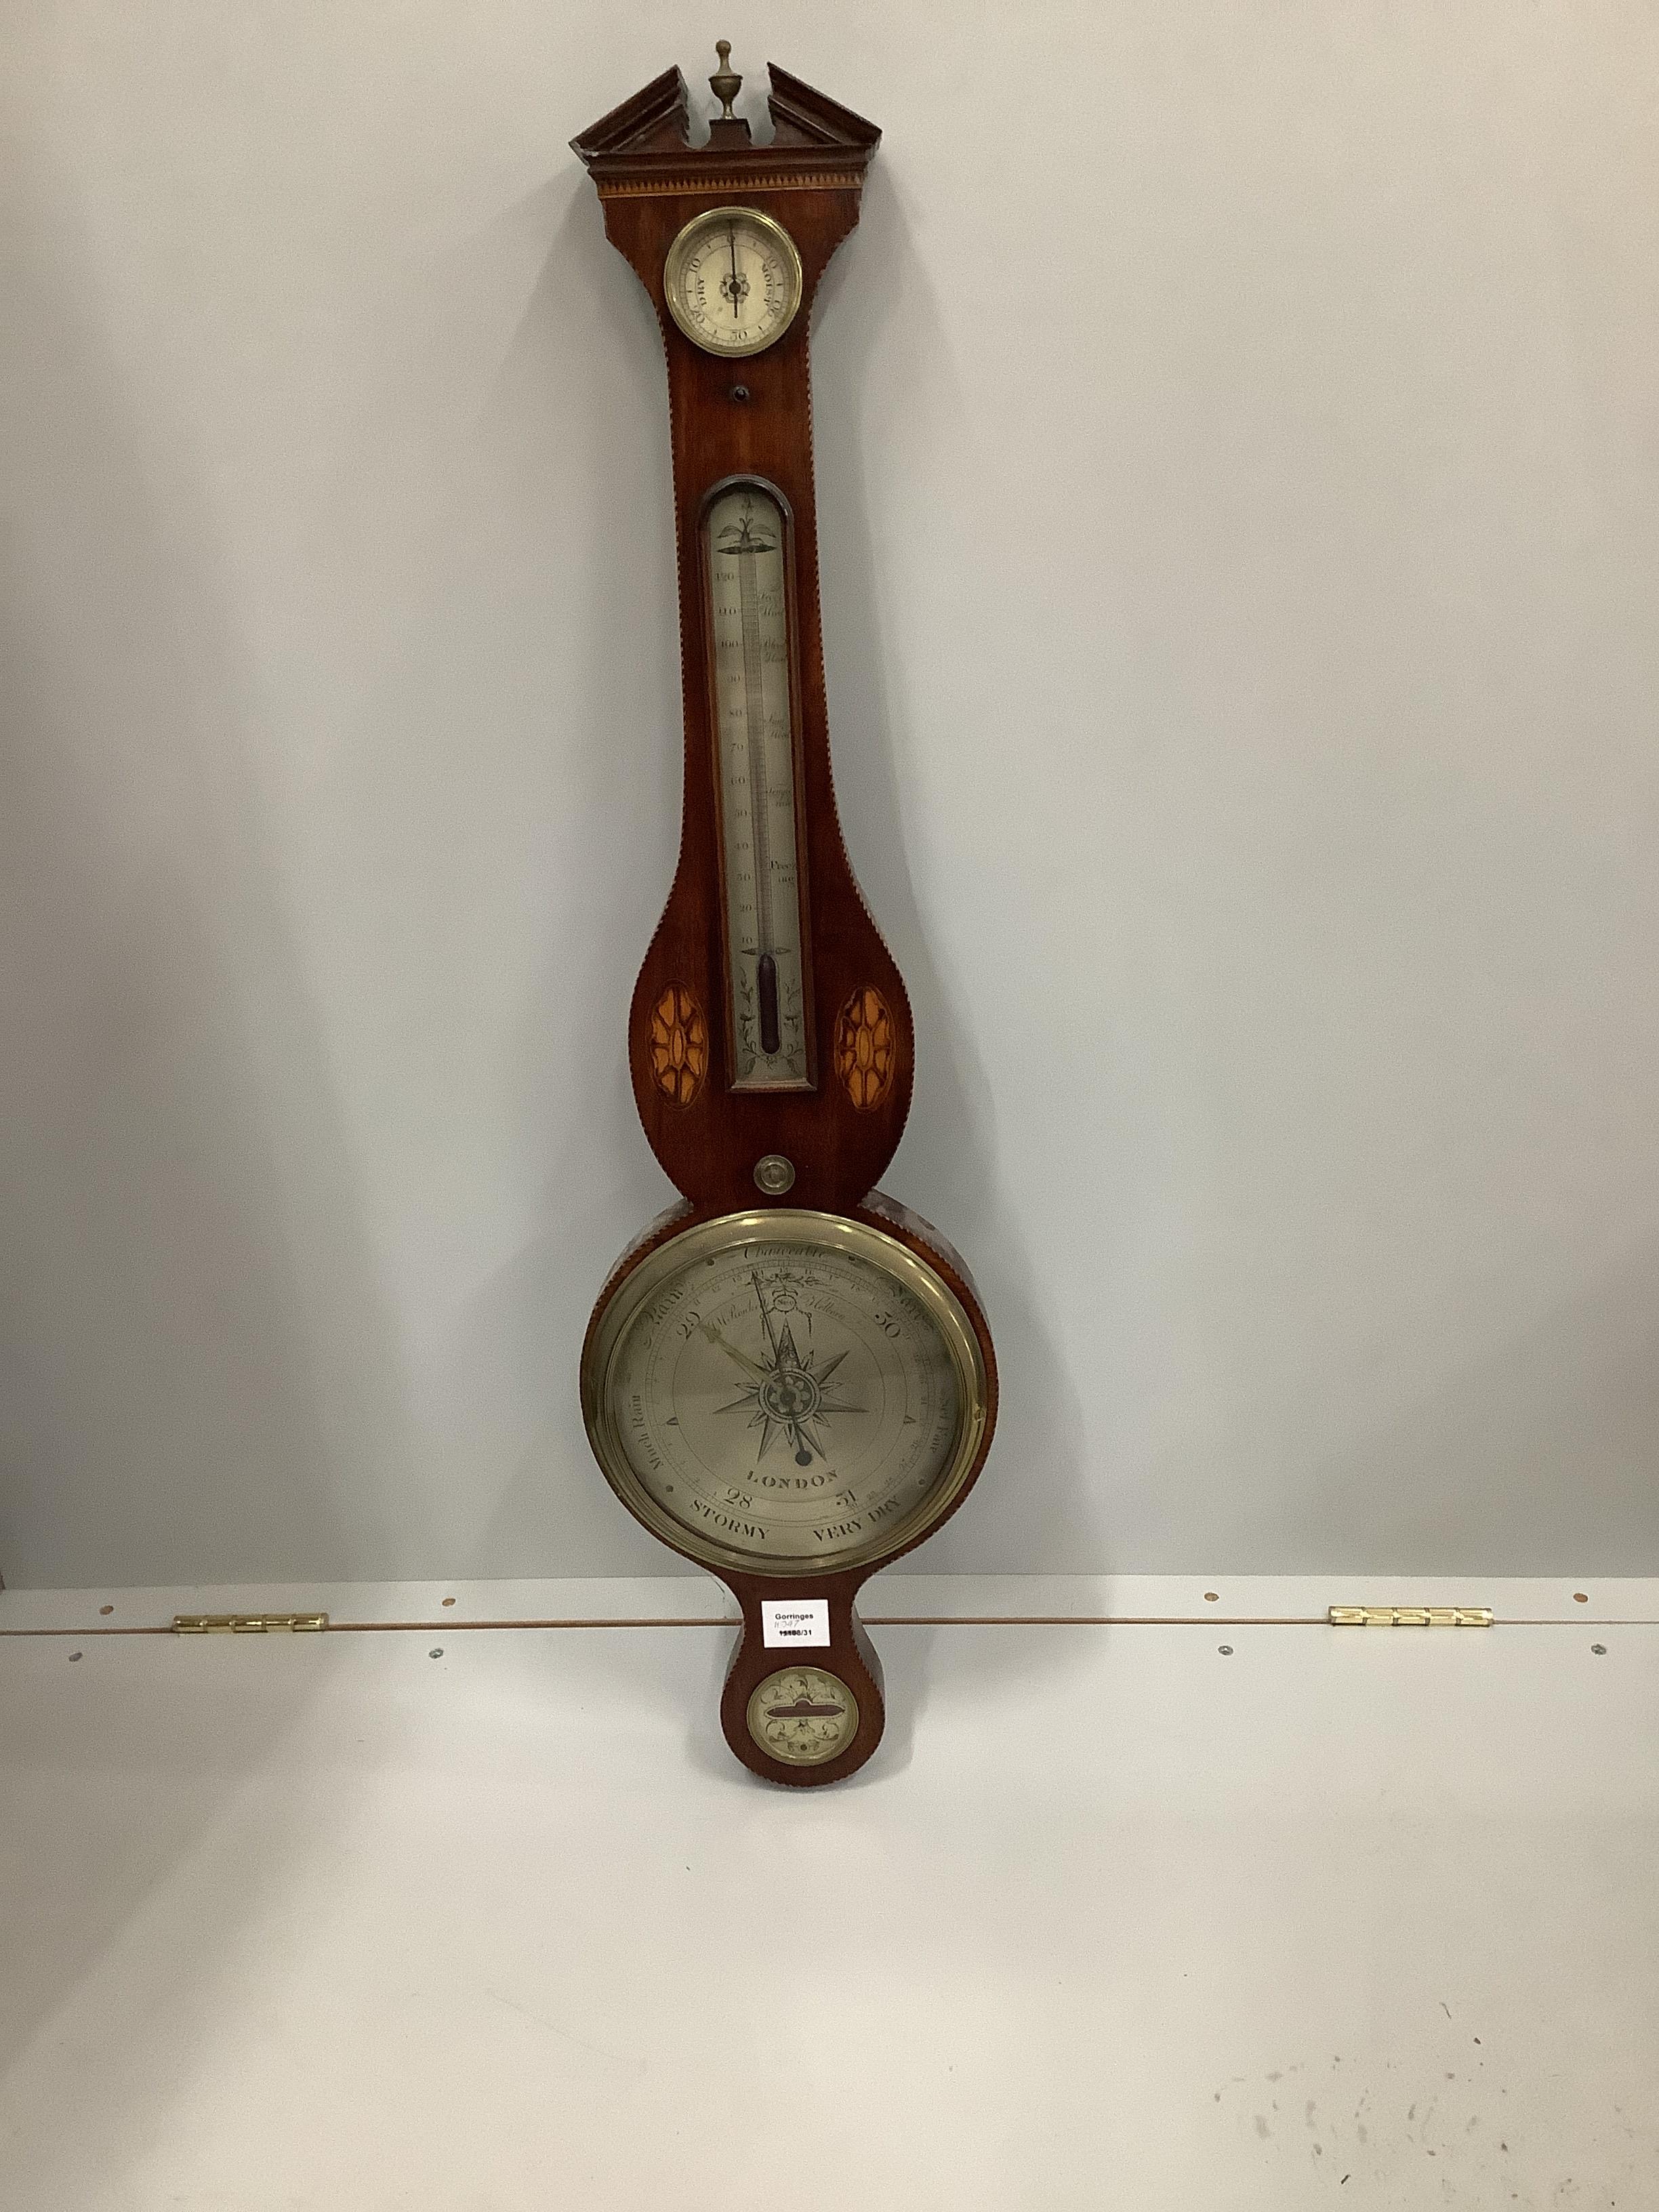 J.M. Ronketti of Holborn. A late George III inlaid mahogany banjo barometer and thermometer, height 100cm                                                                                                                   